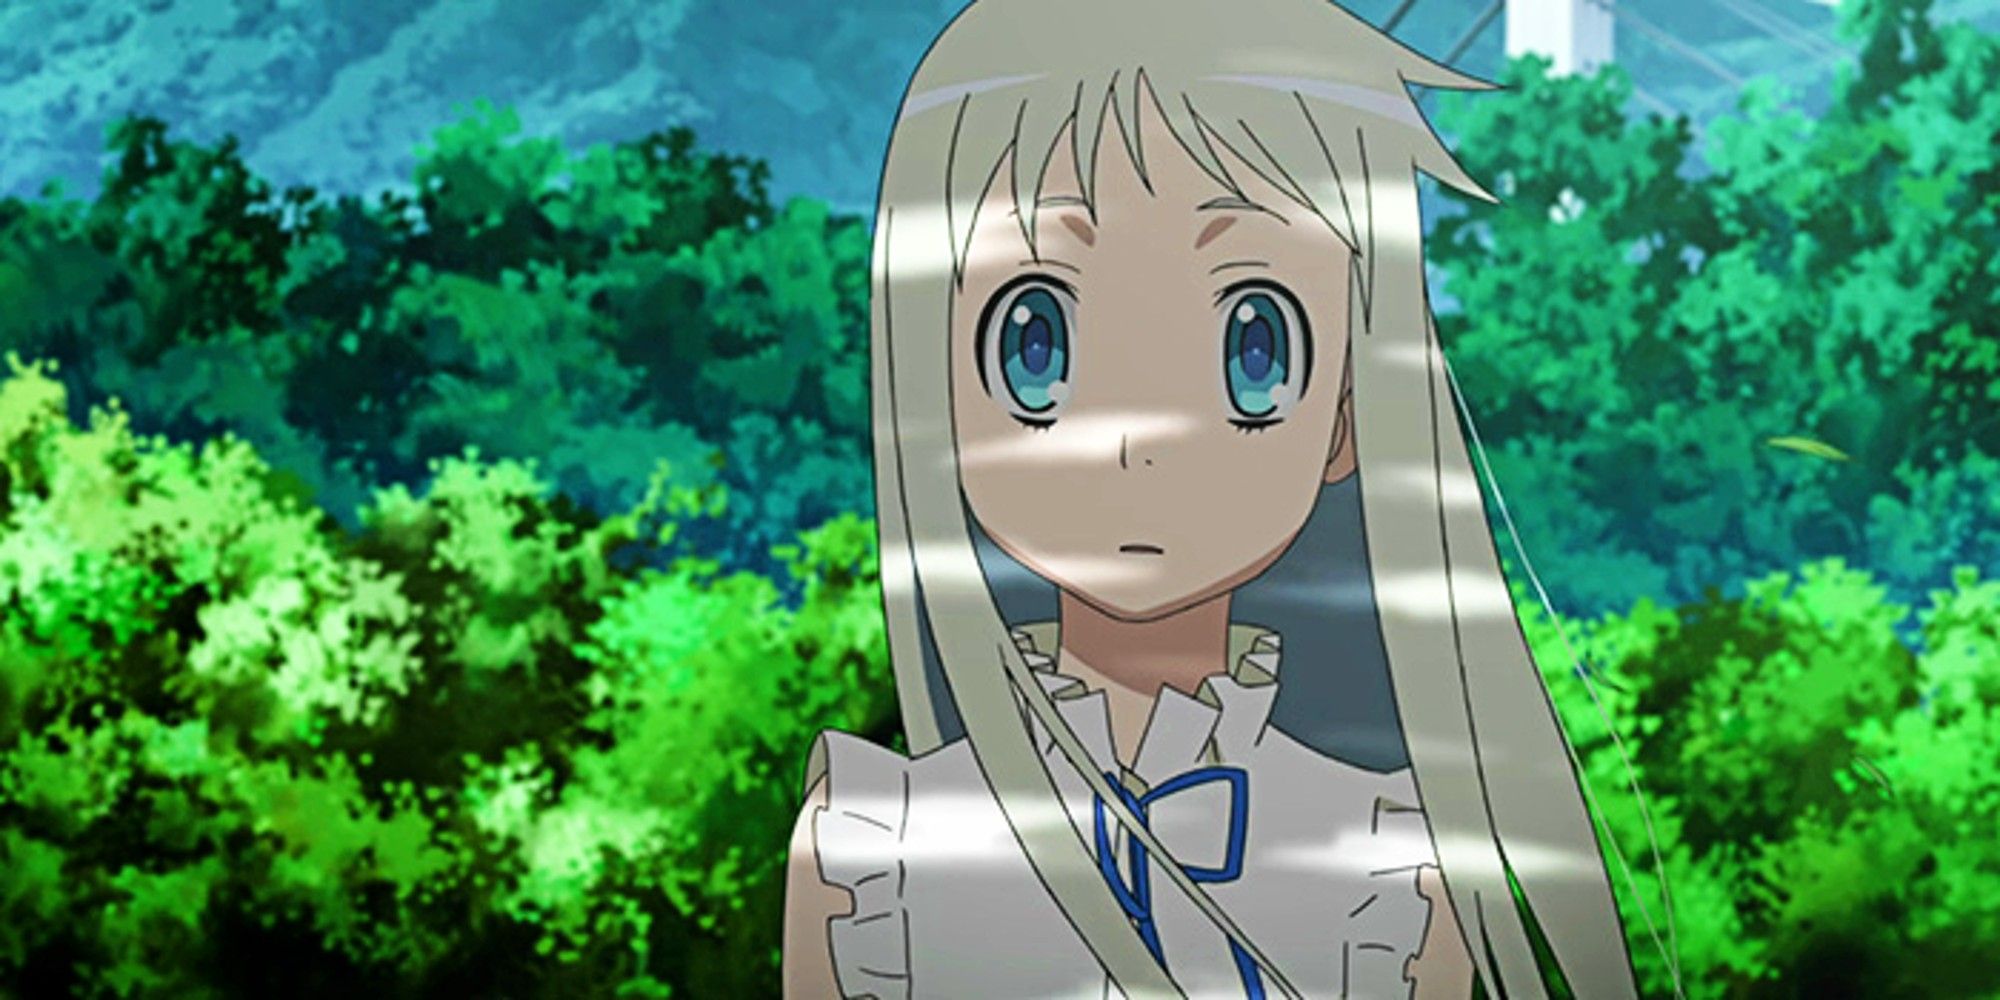 Menma Honma from Anohana: The Flower We Saw That Day ghost anime